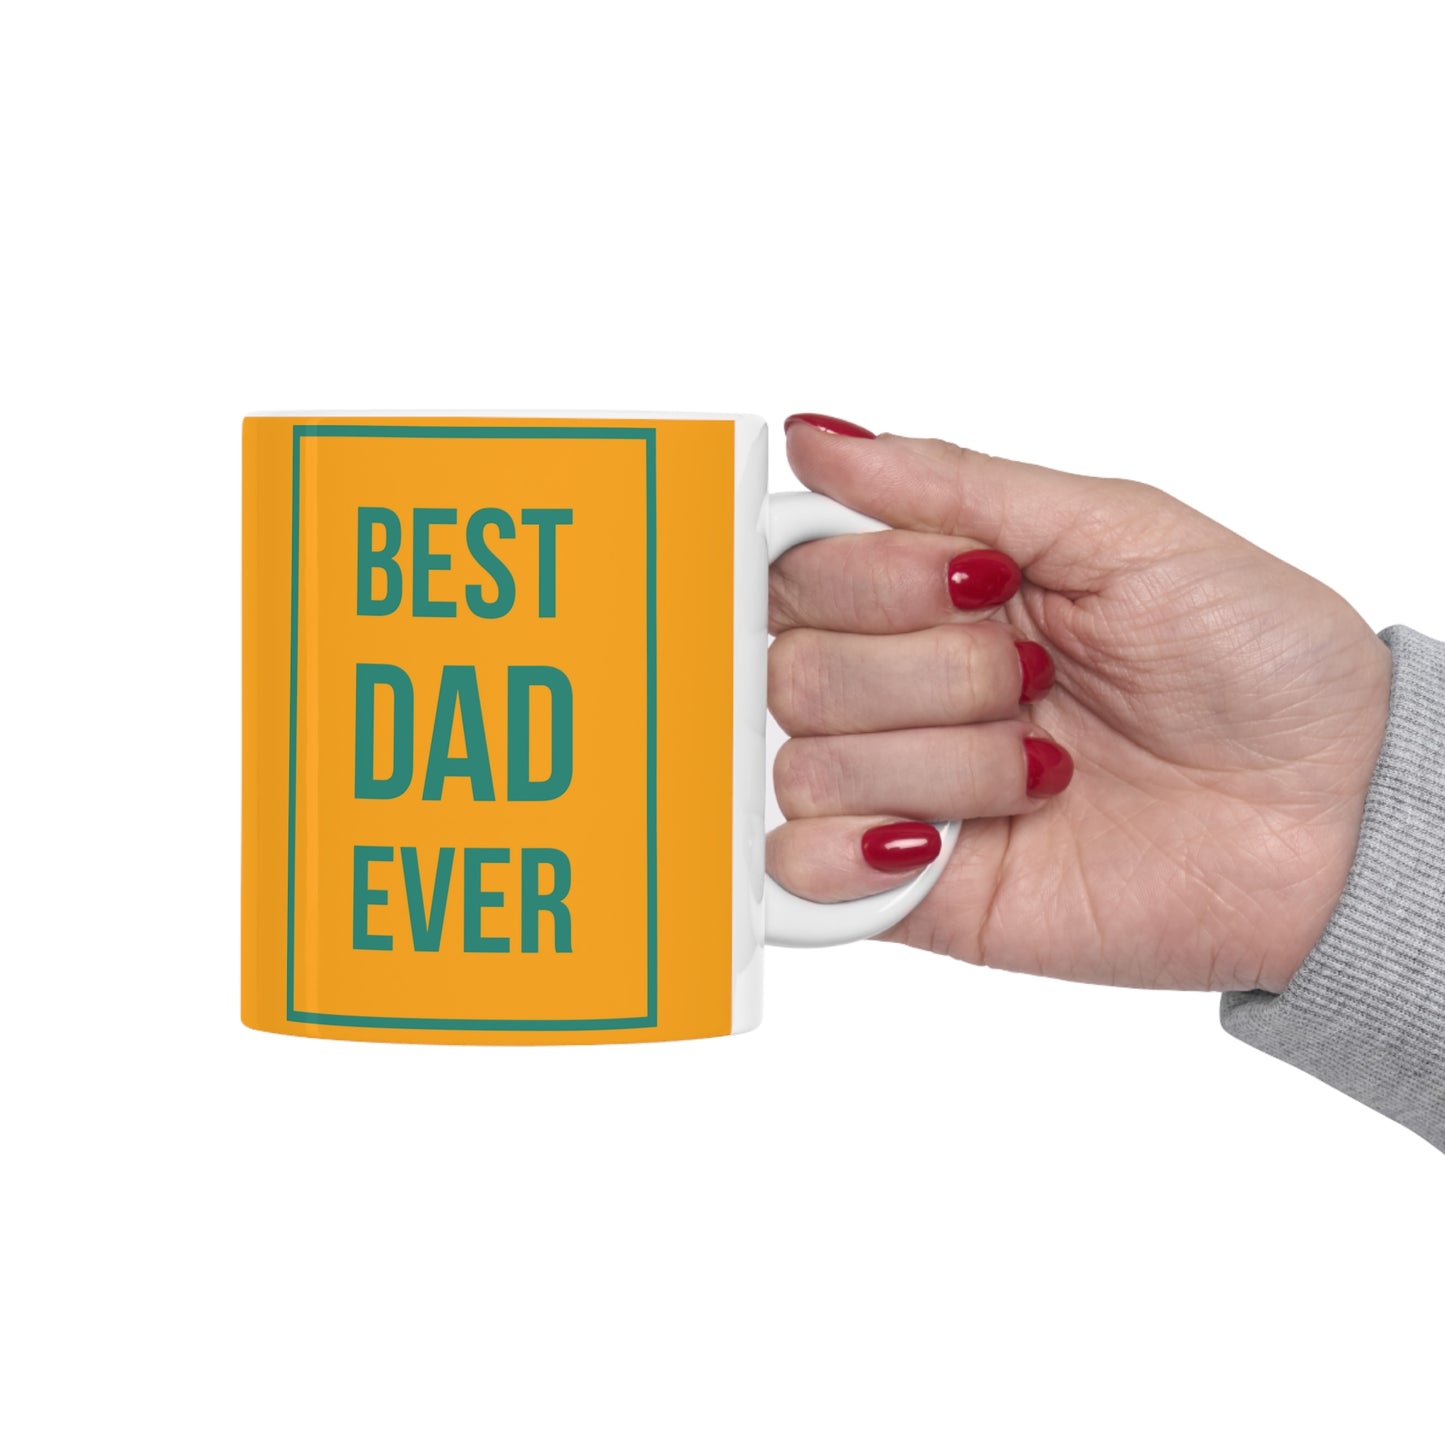 “BEST DAD EVER” on one side and a dad teaching his child to dance. Part of several mugs to choose from depending on what resonates with you.